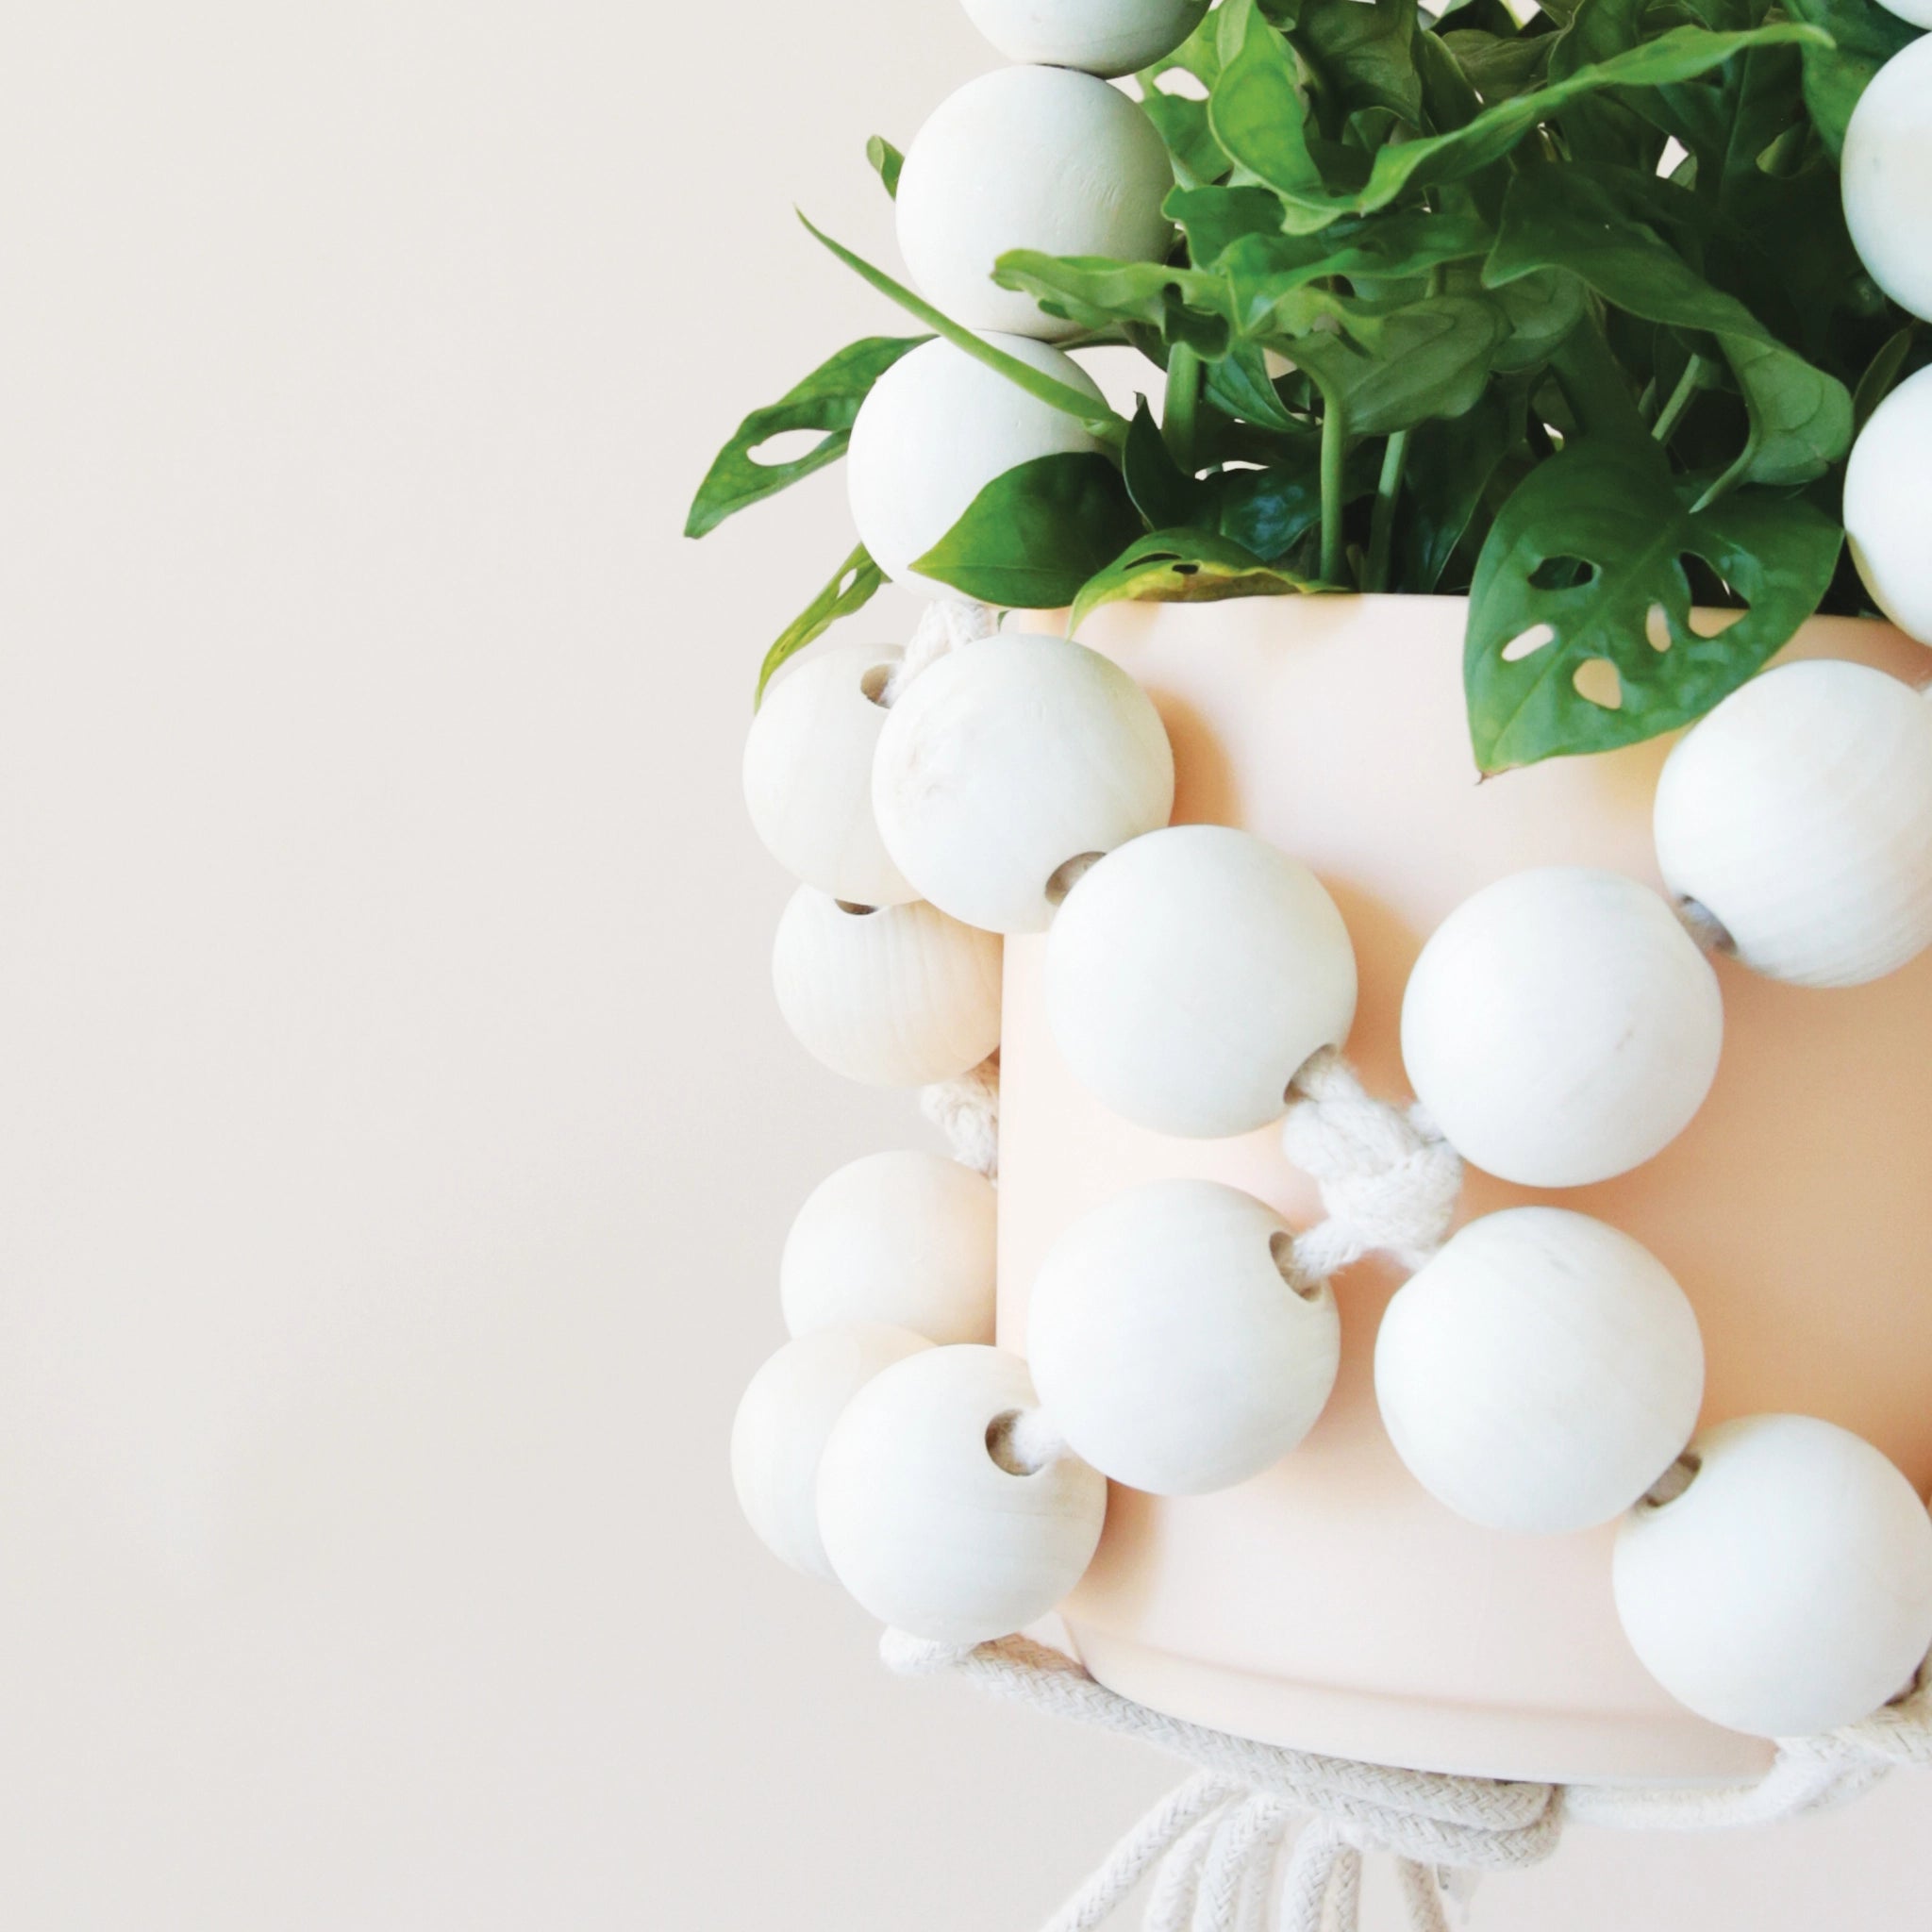 A plant hanger made of large round wooden beads forming a basket shape and coming together at the top to hang.